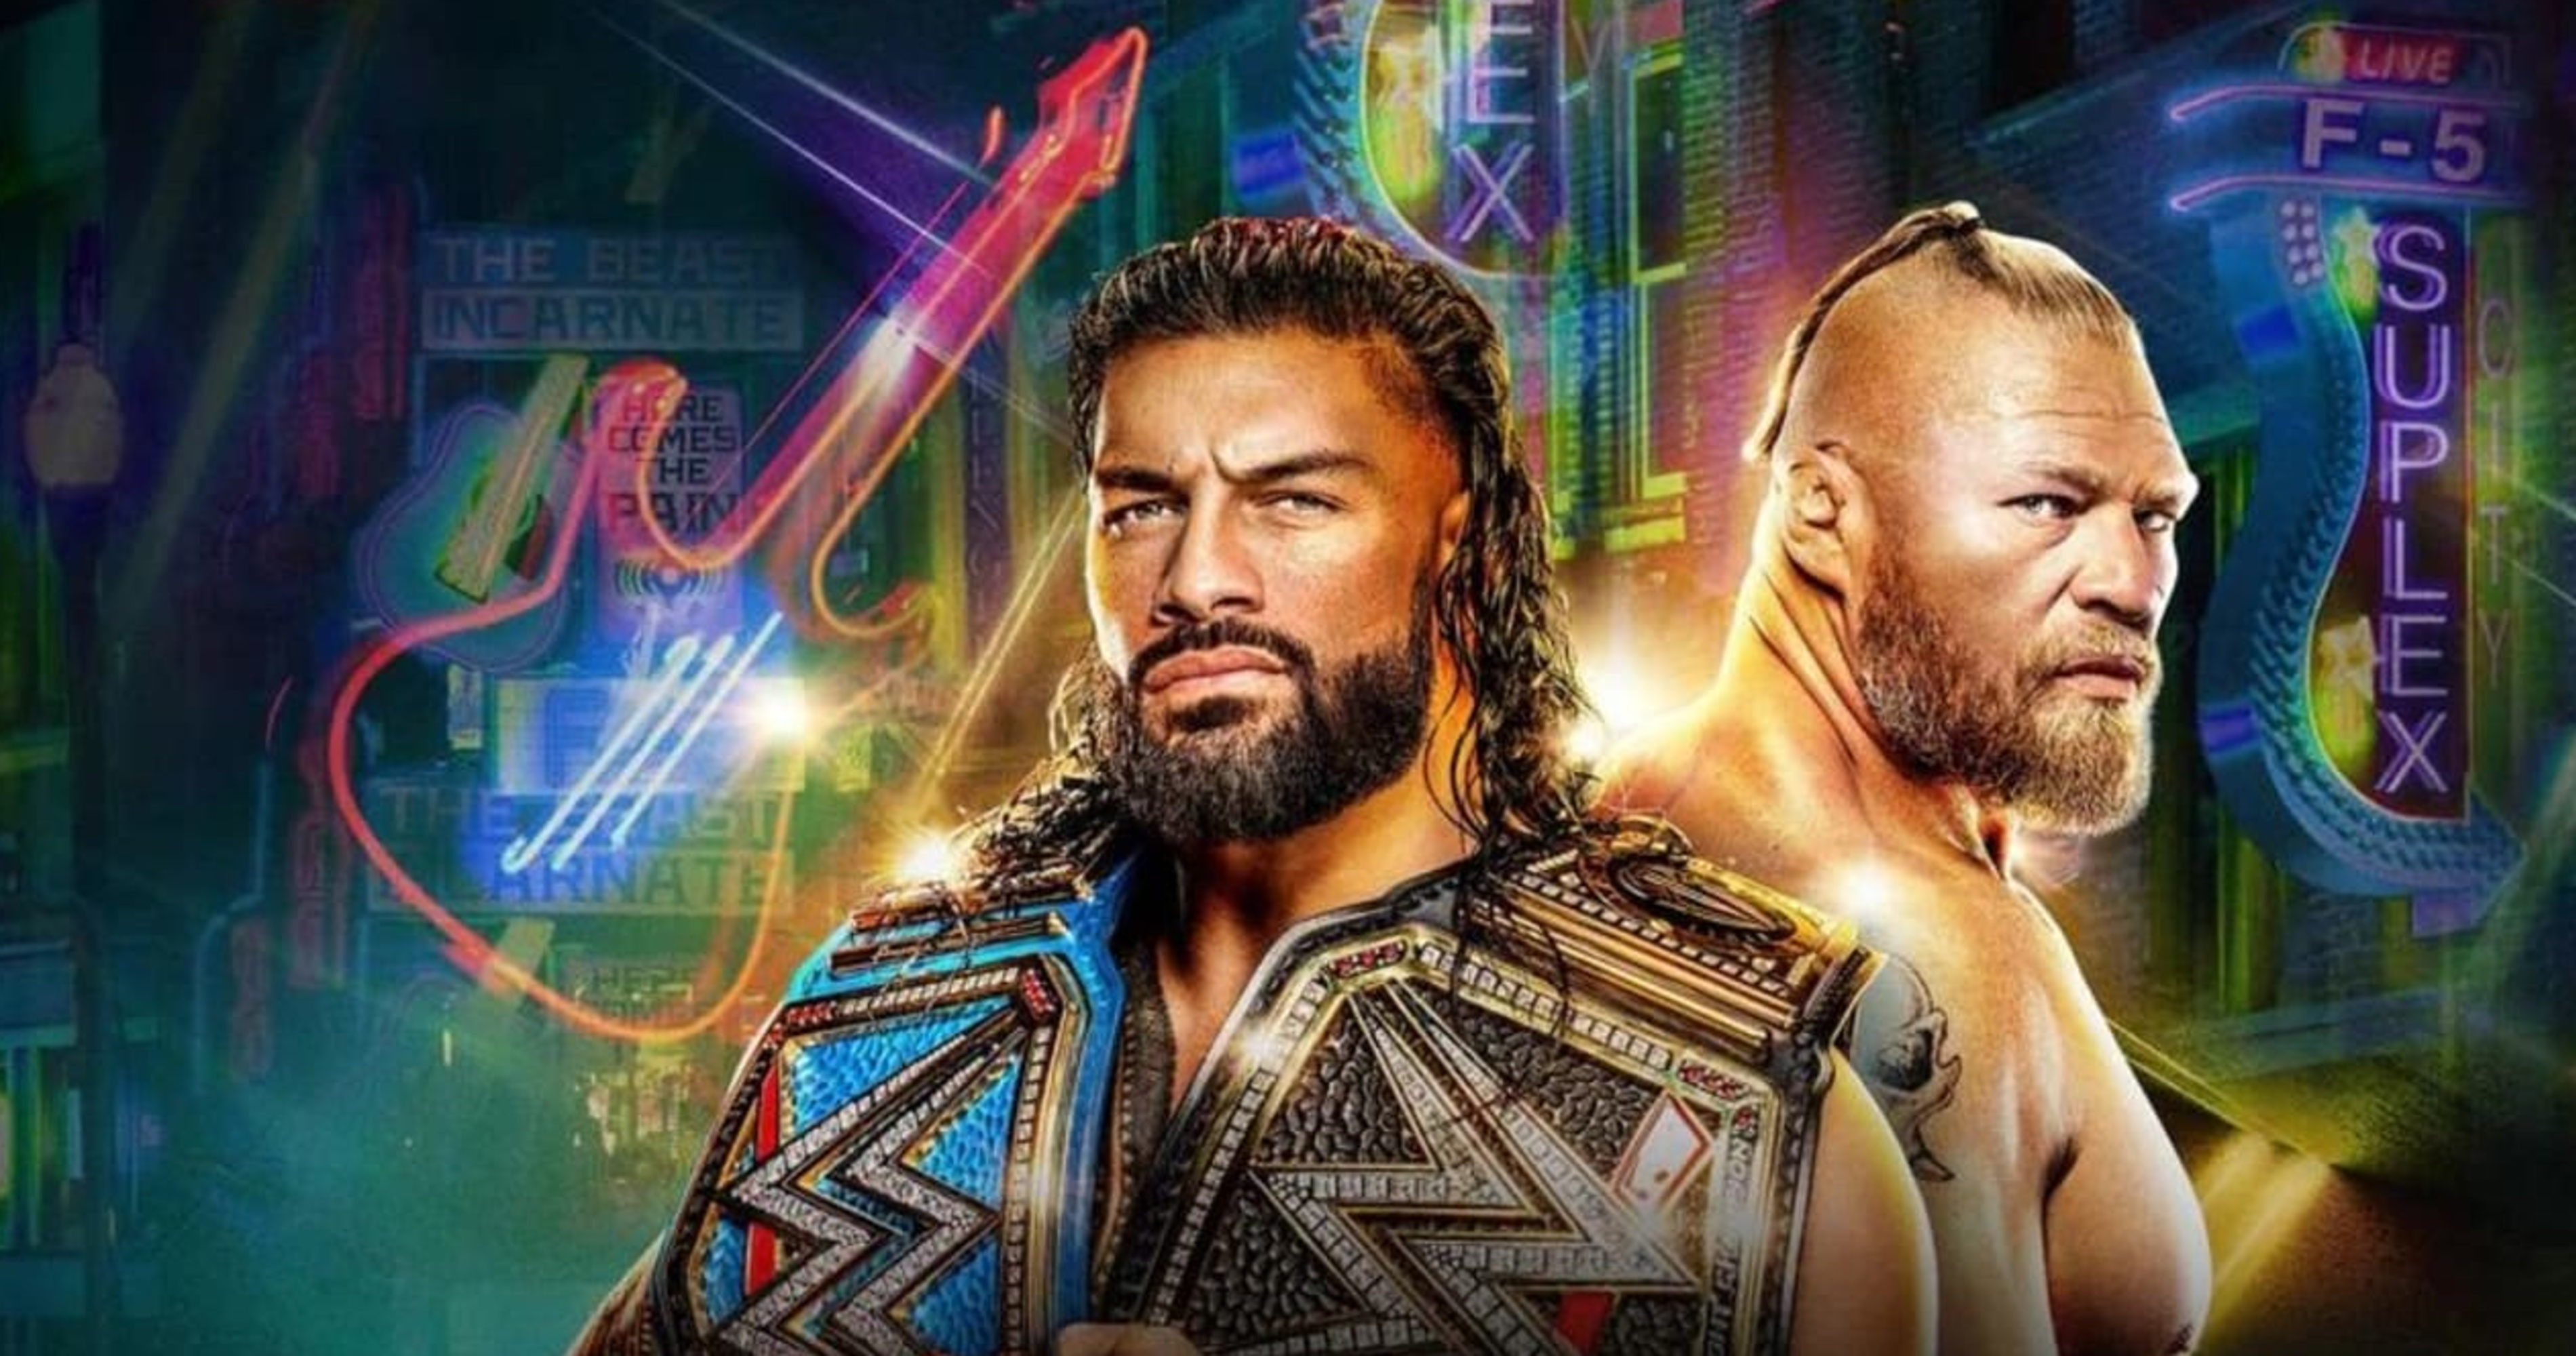 Updated WWE SummerSlam 2022 Match Card and Predictions Before GoHome